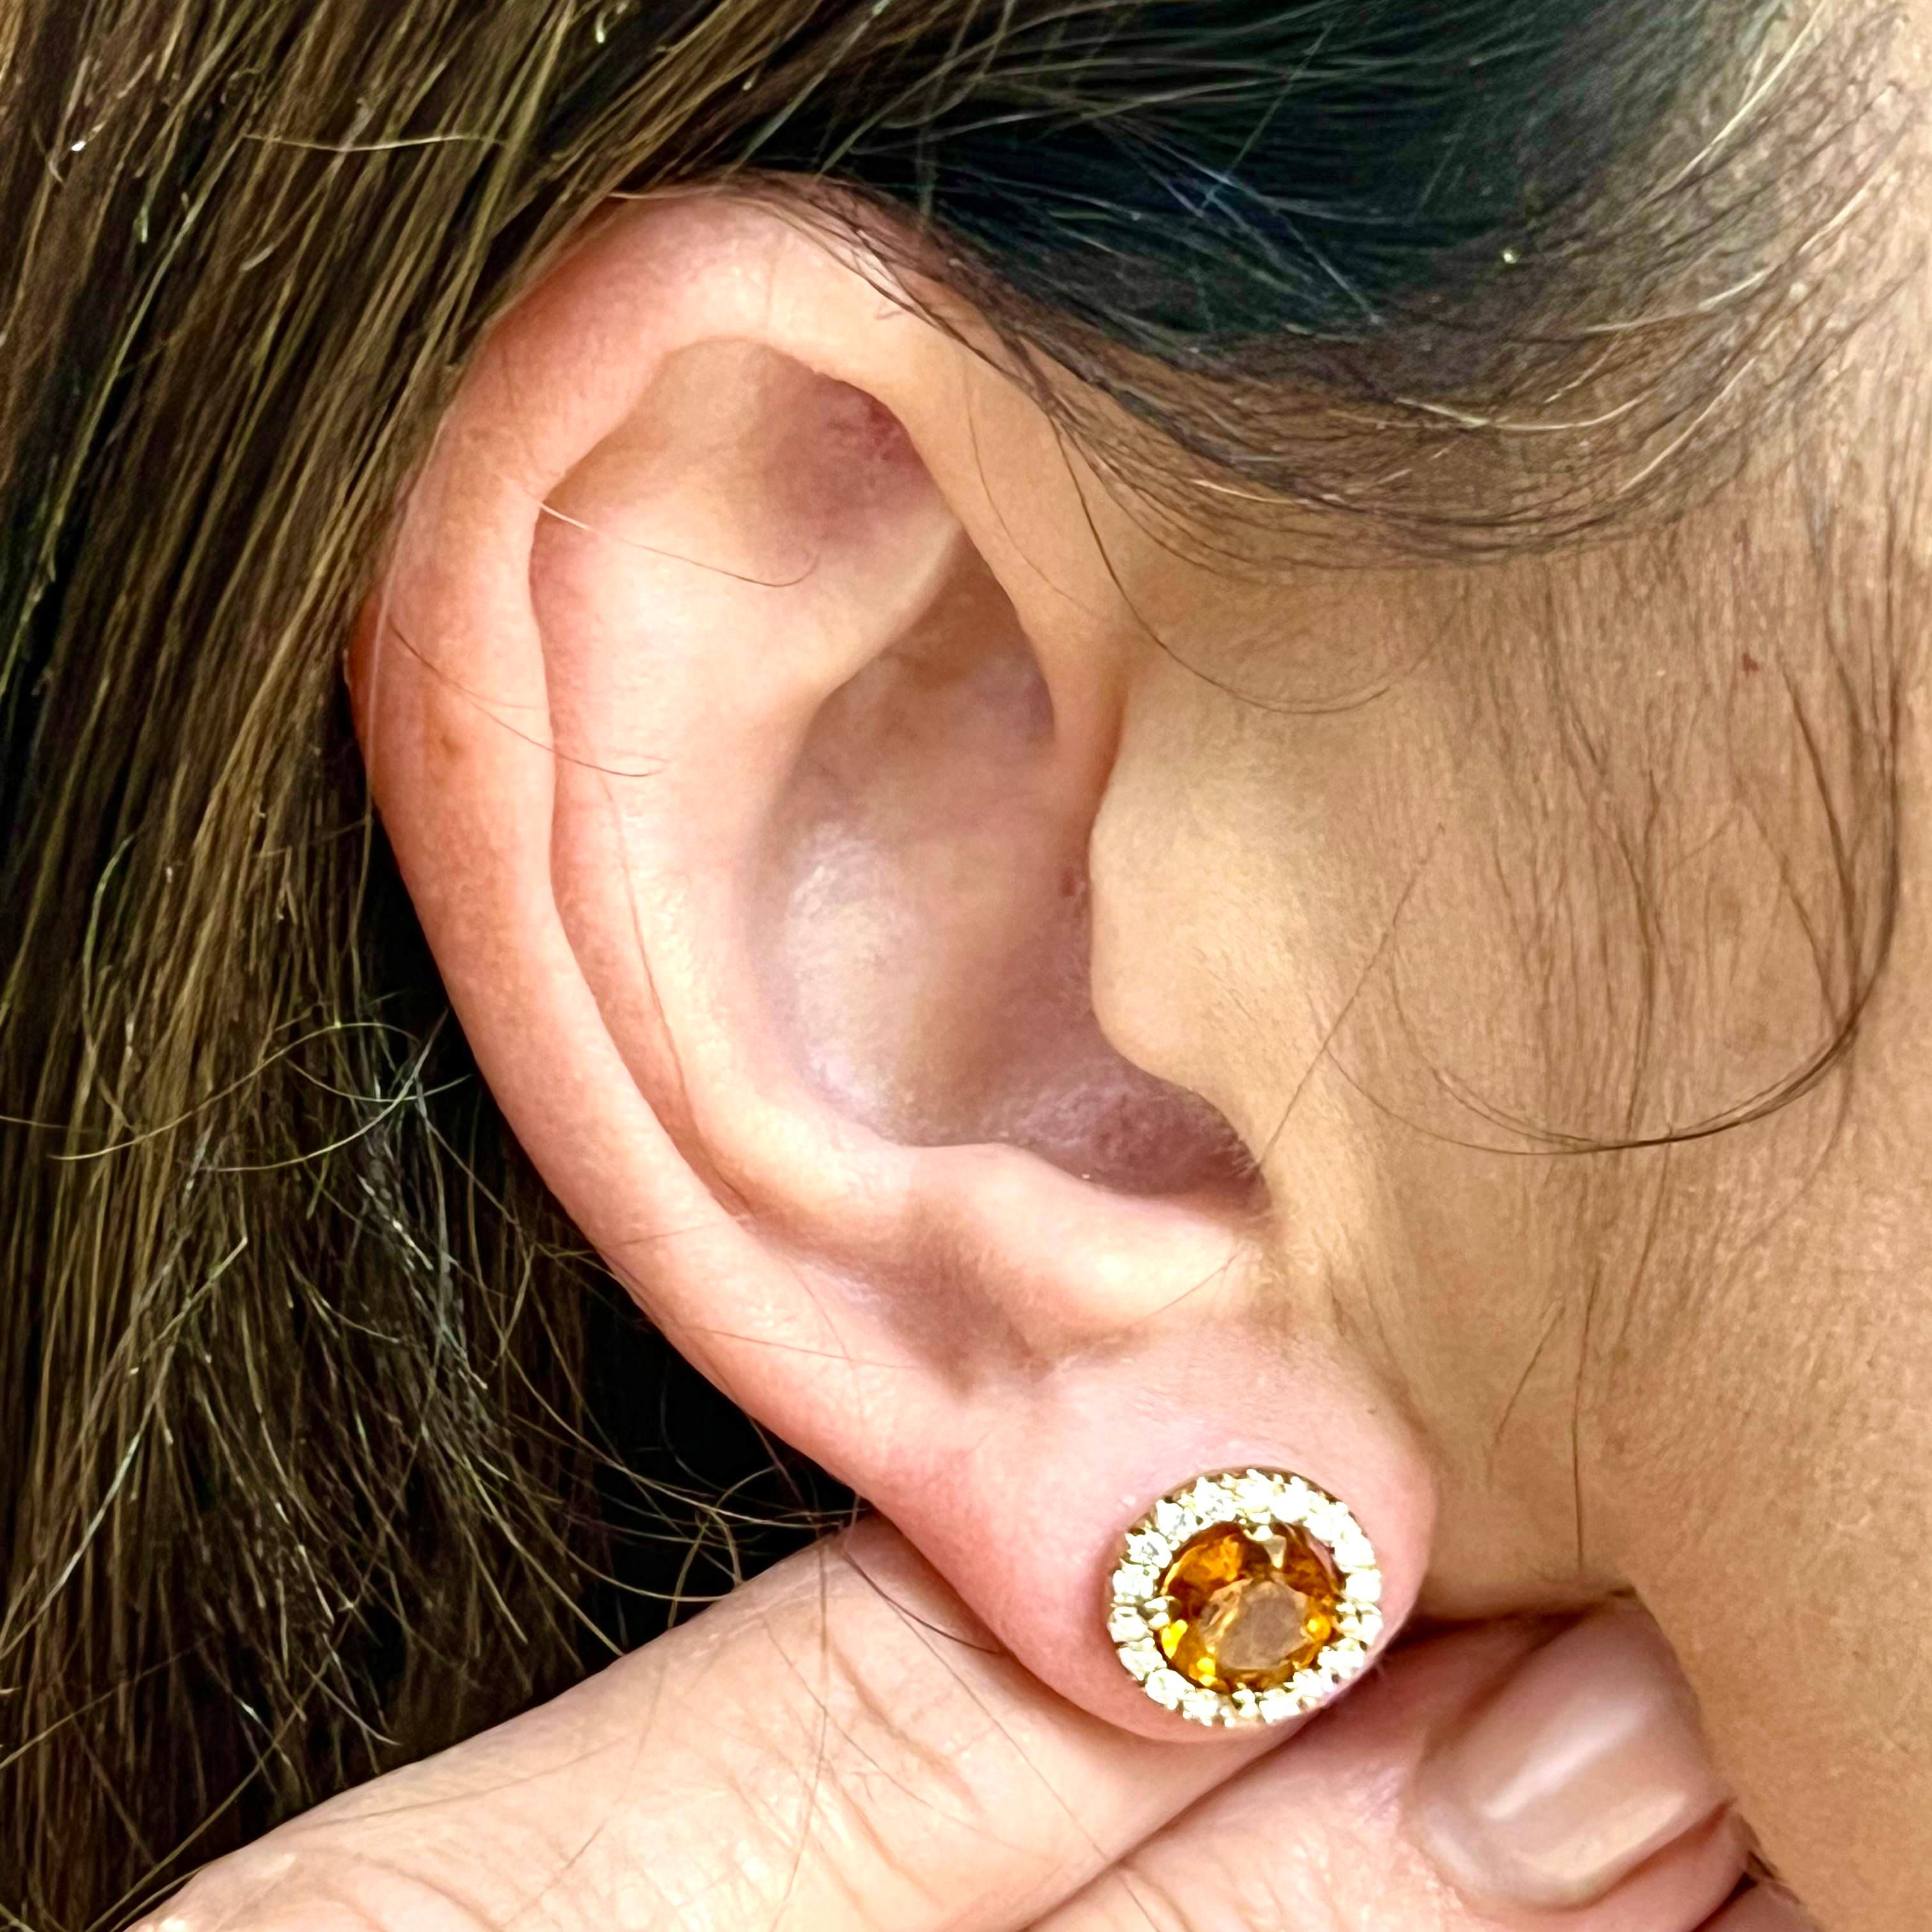 Natural Orange Sapphire Diamond Stud Earrings 14k WG 3.54 TCW Certified $5,975 216662

This is a Unique Custom Made Glamorous Piece of Jewelry!

Nothing says, “I Love you” more than Diamonds and Pearls!

These Finely Faceted Quality Orange Sapphire